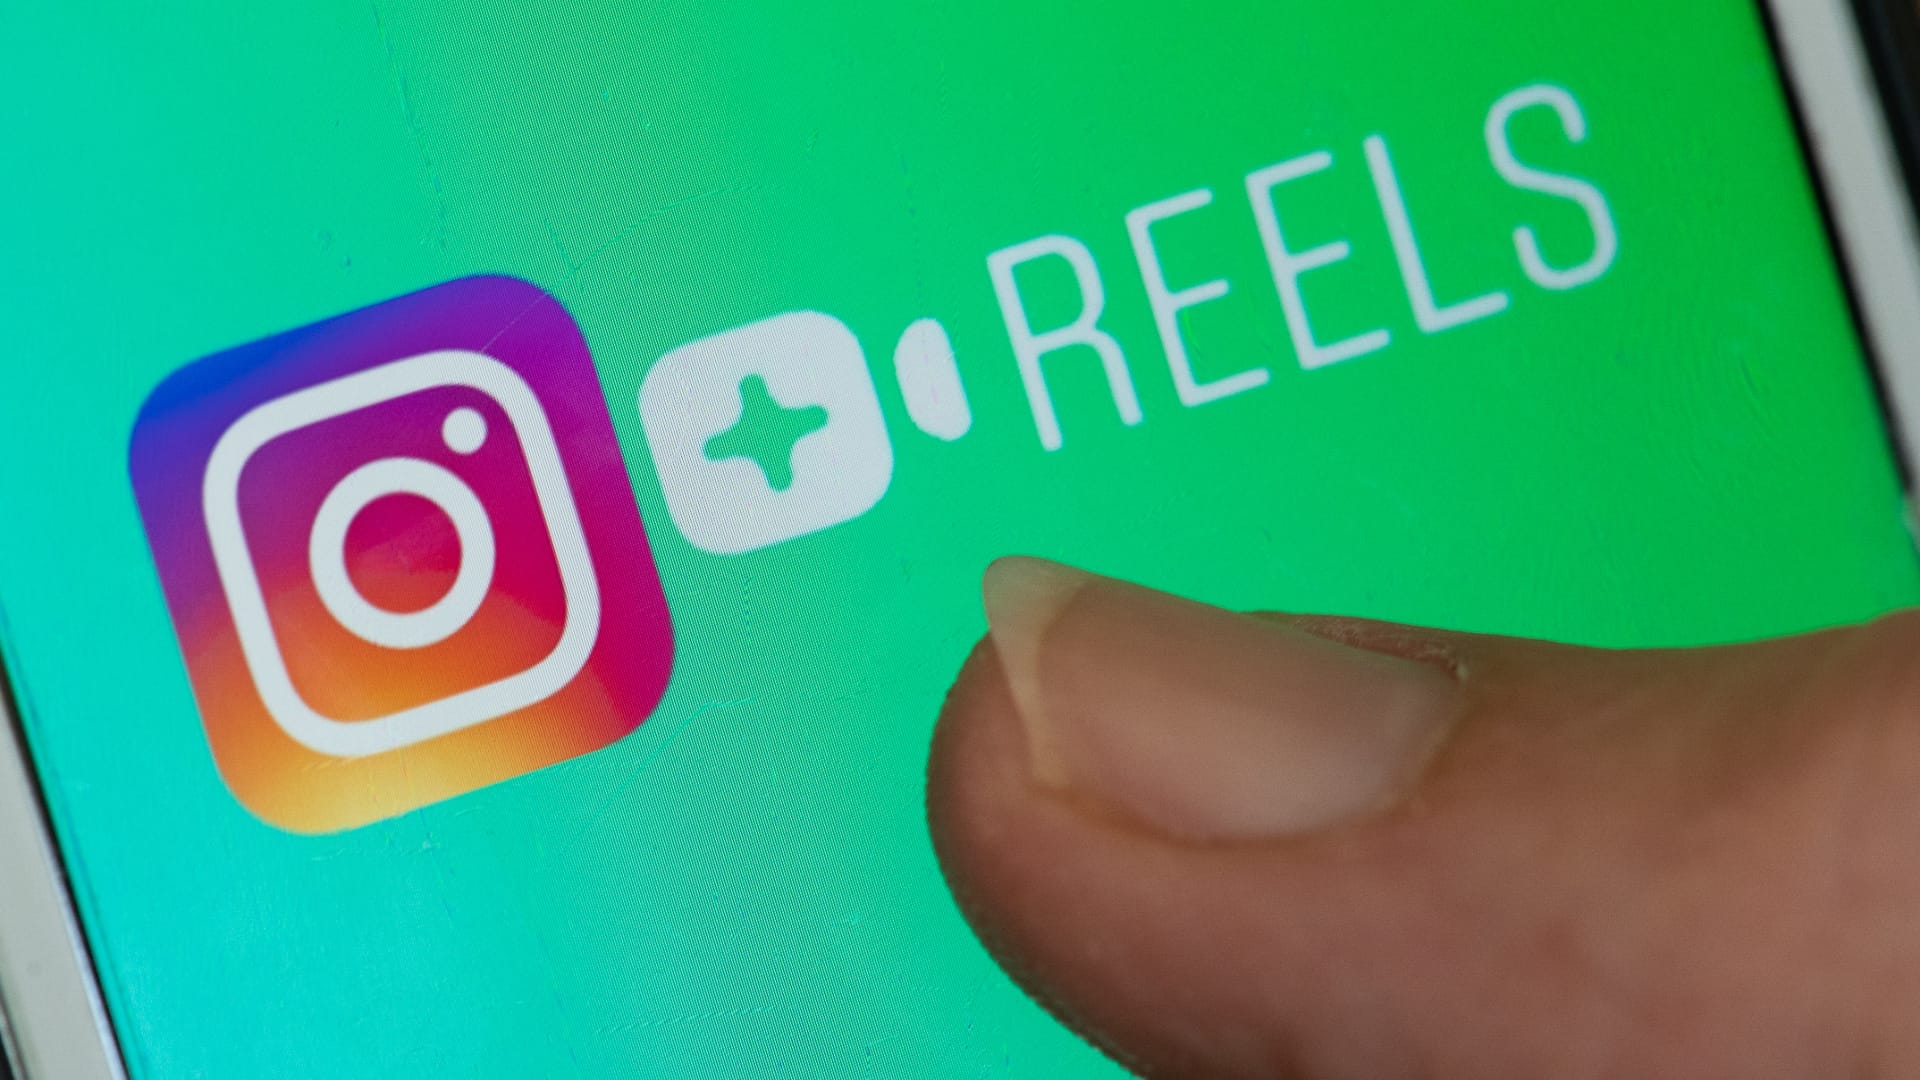 You can change your Instagram feed so it looks less like TikTok and only shows posts from your friends. Here's how